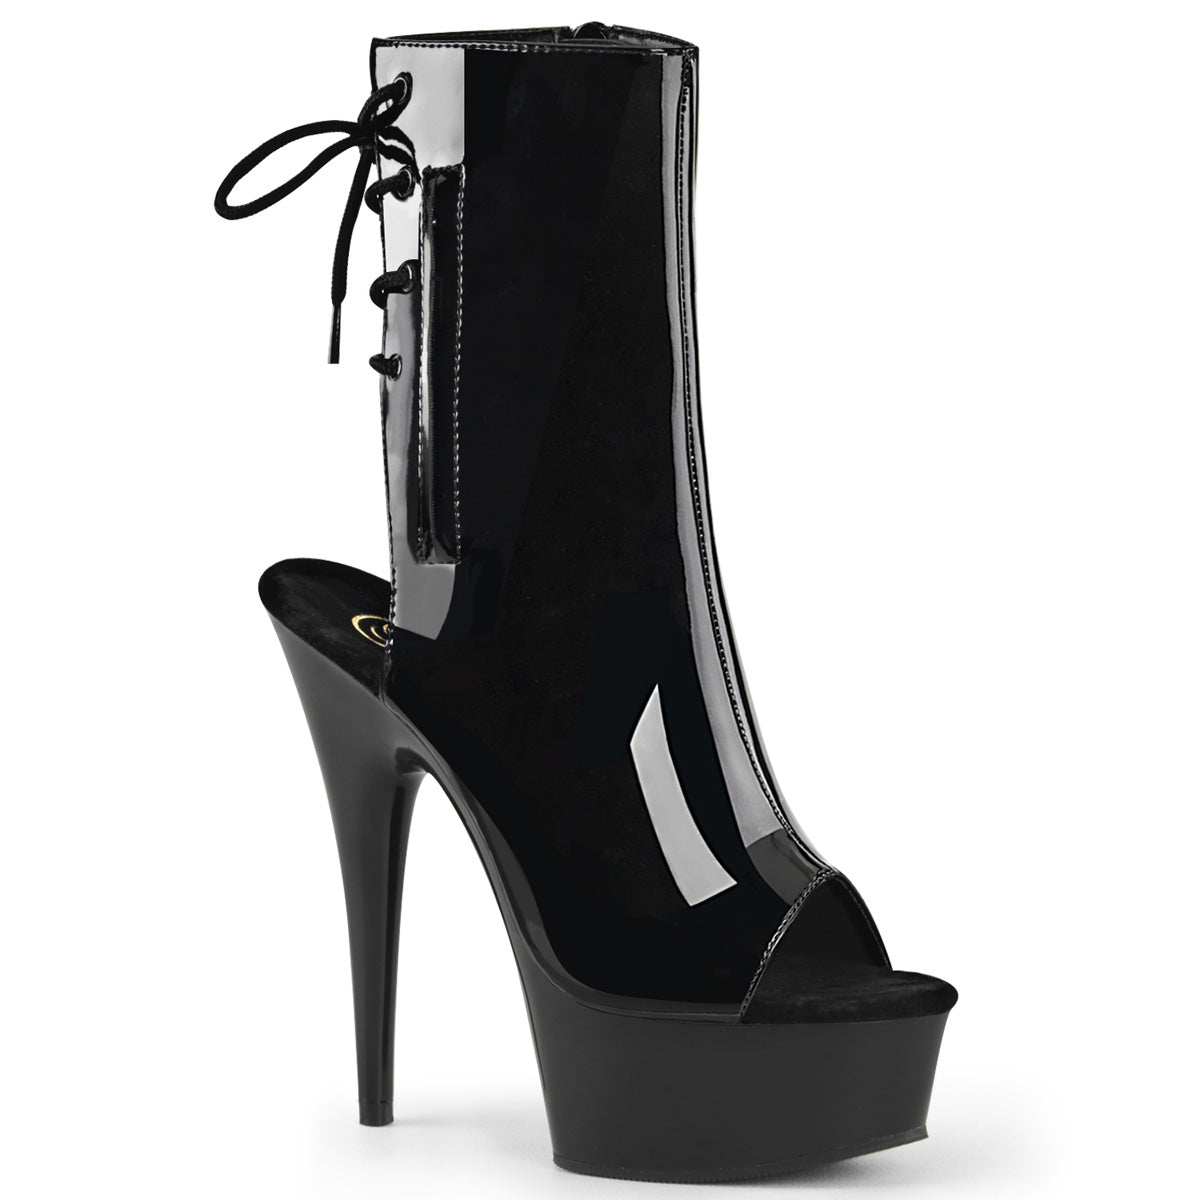 DELIGHT-1018 Black Patent Ankle Boot Pleaser